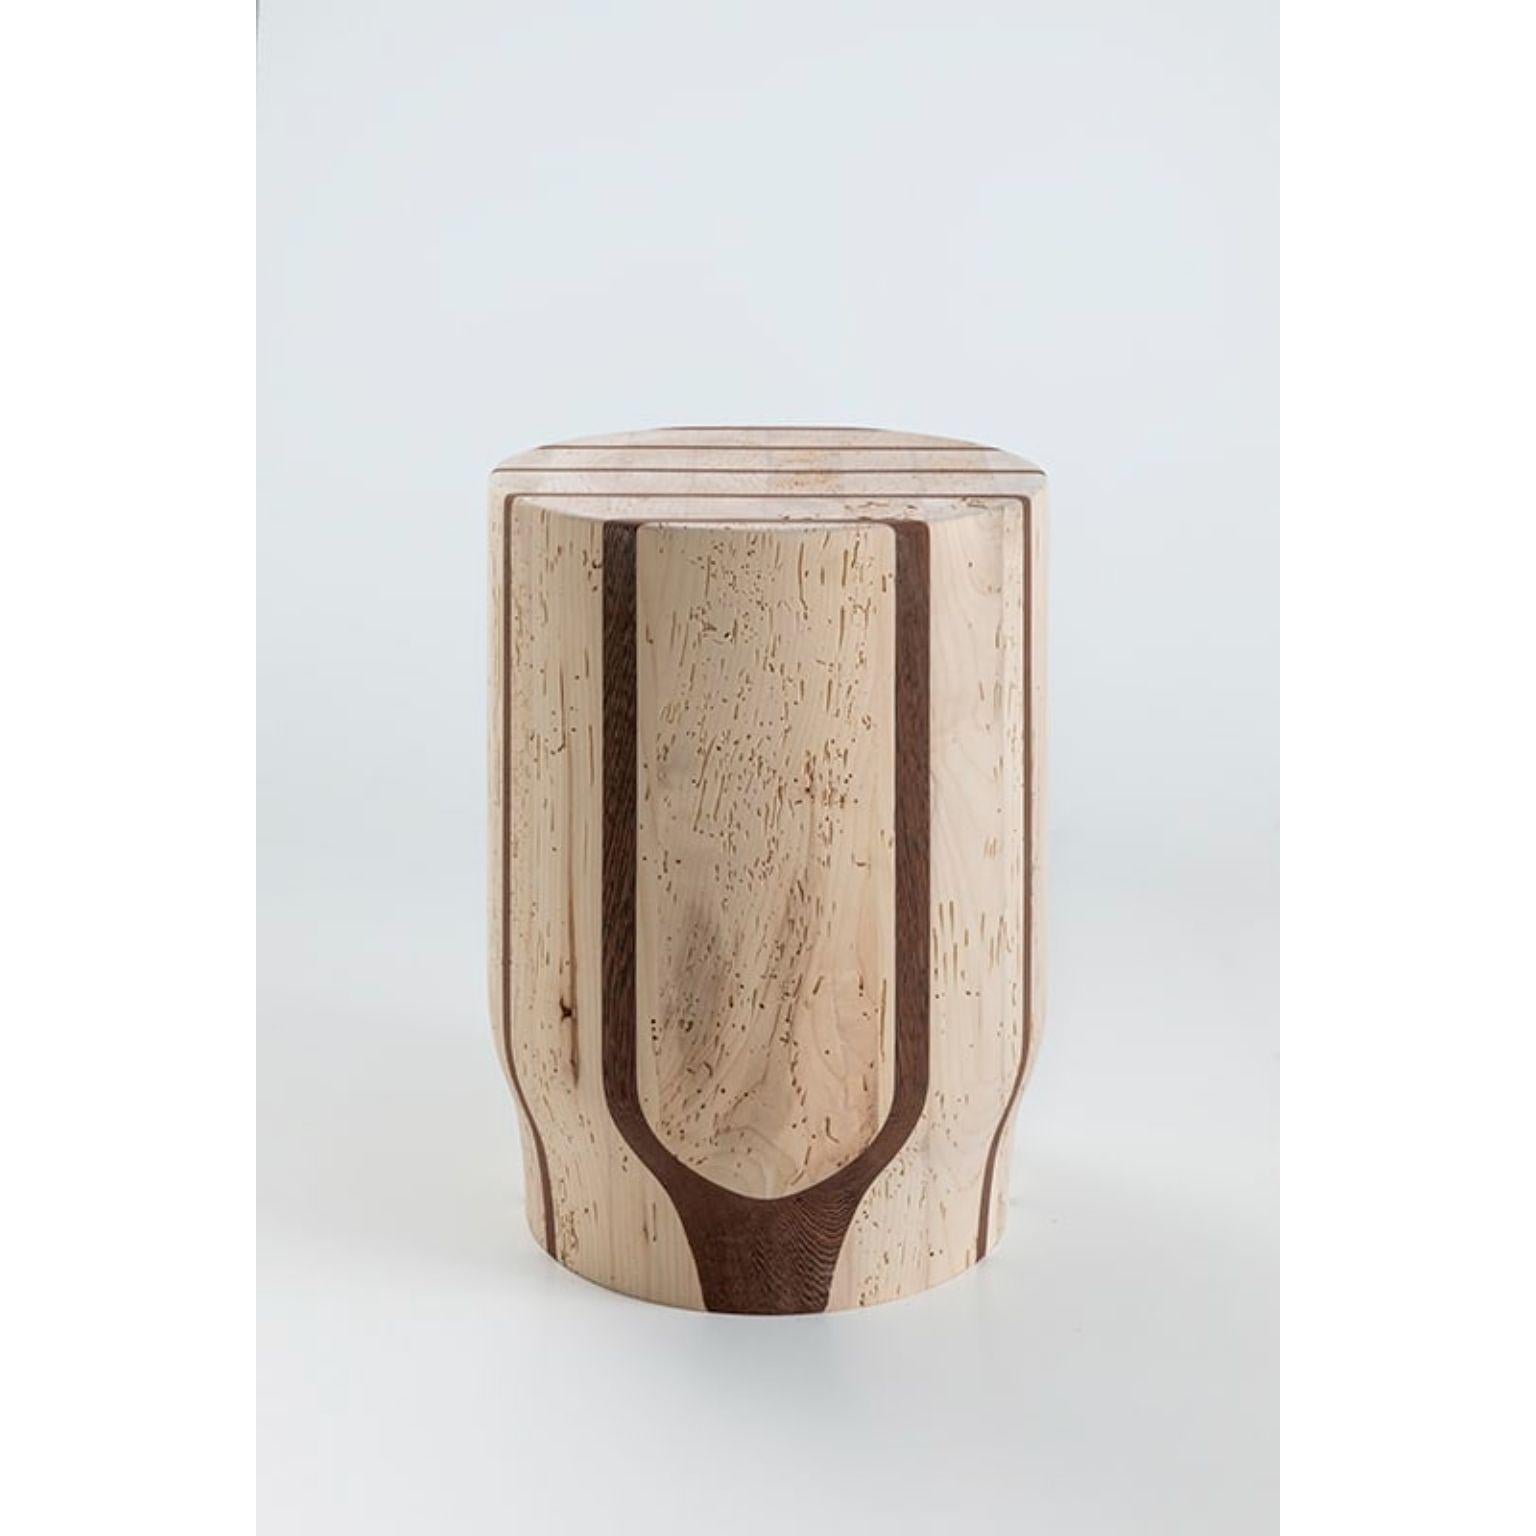 Jeunesse Wengè Stool by Secondome Edizioni and Studio F
Designer: Duccio Maria Gambi.
Dimensions: Ø 32 x H 43 cm.
Materials: Solid woodworm maple wood and wengè wood. 

Collection / Production: Secondome + Studio F. This piece can be customized.